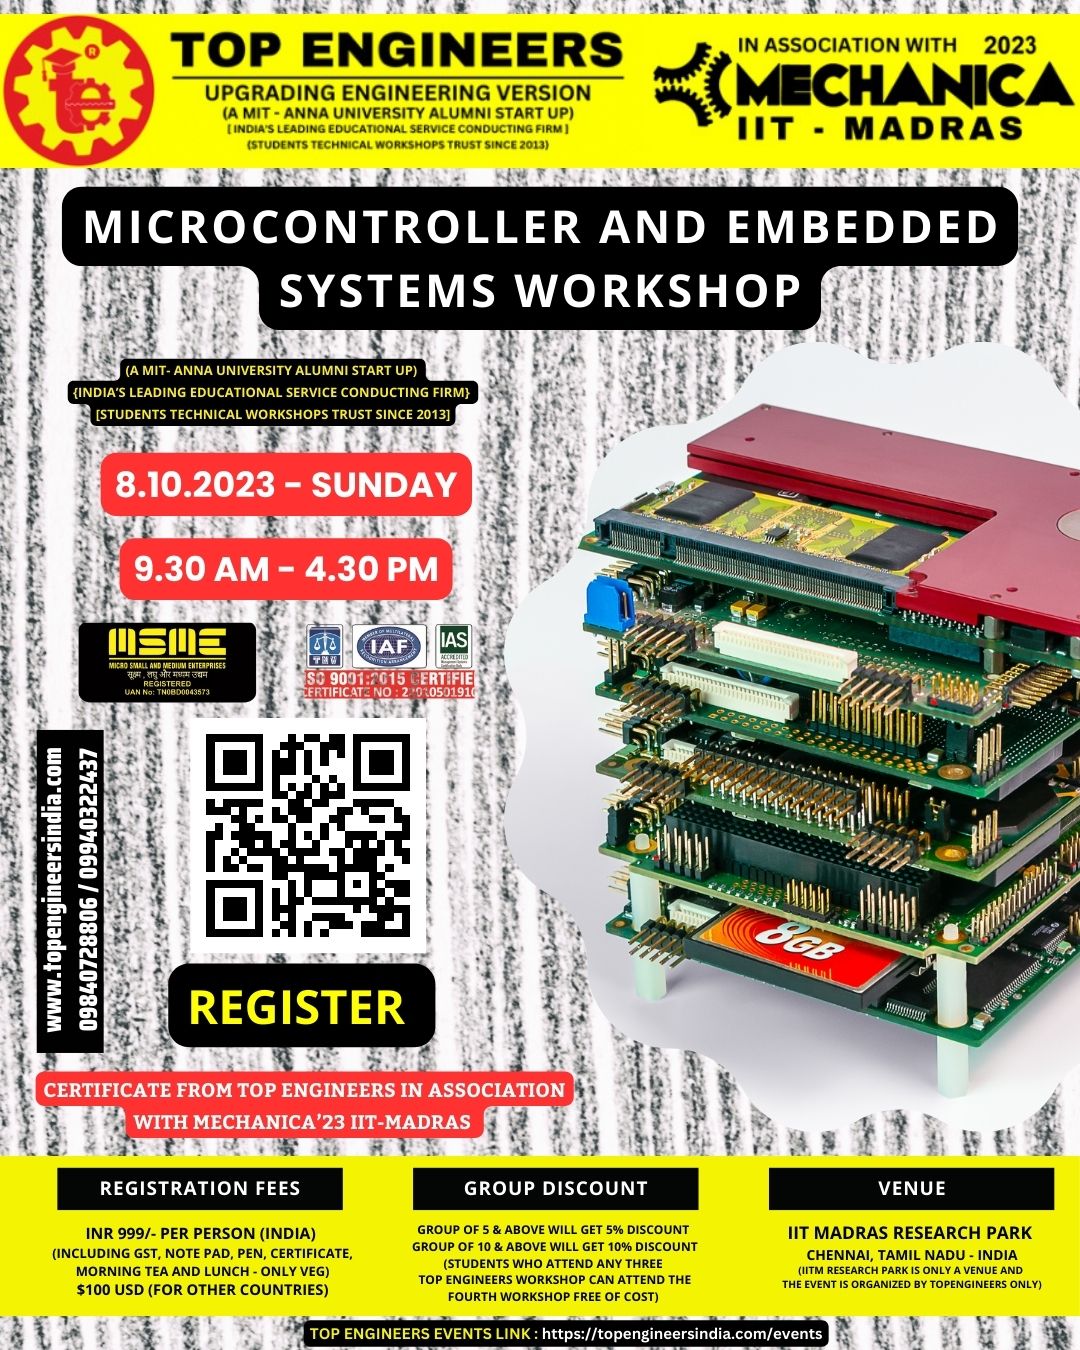 Microcontroller and Embedded Systems Workshop 2023